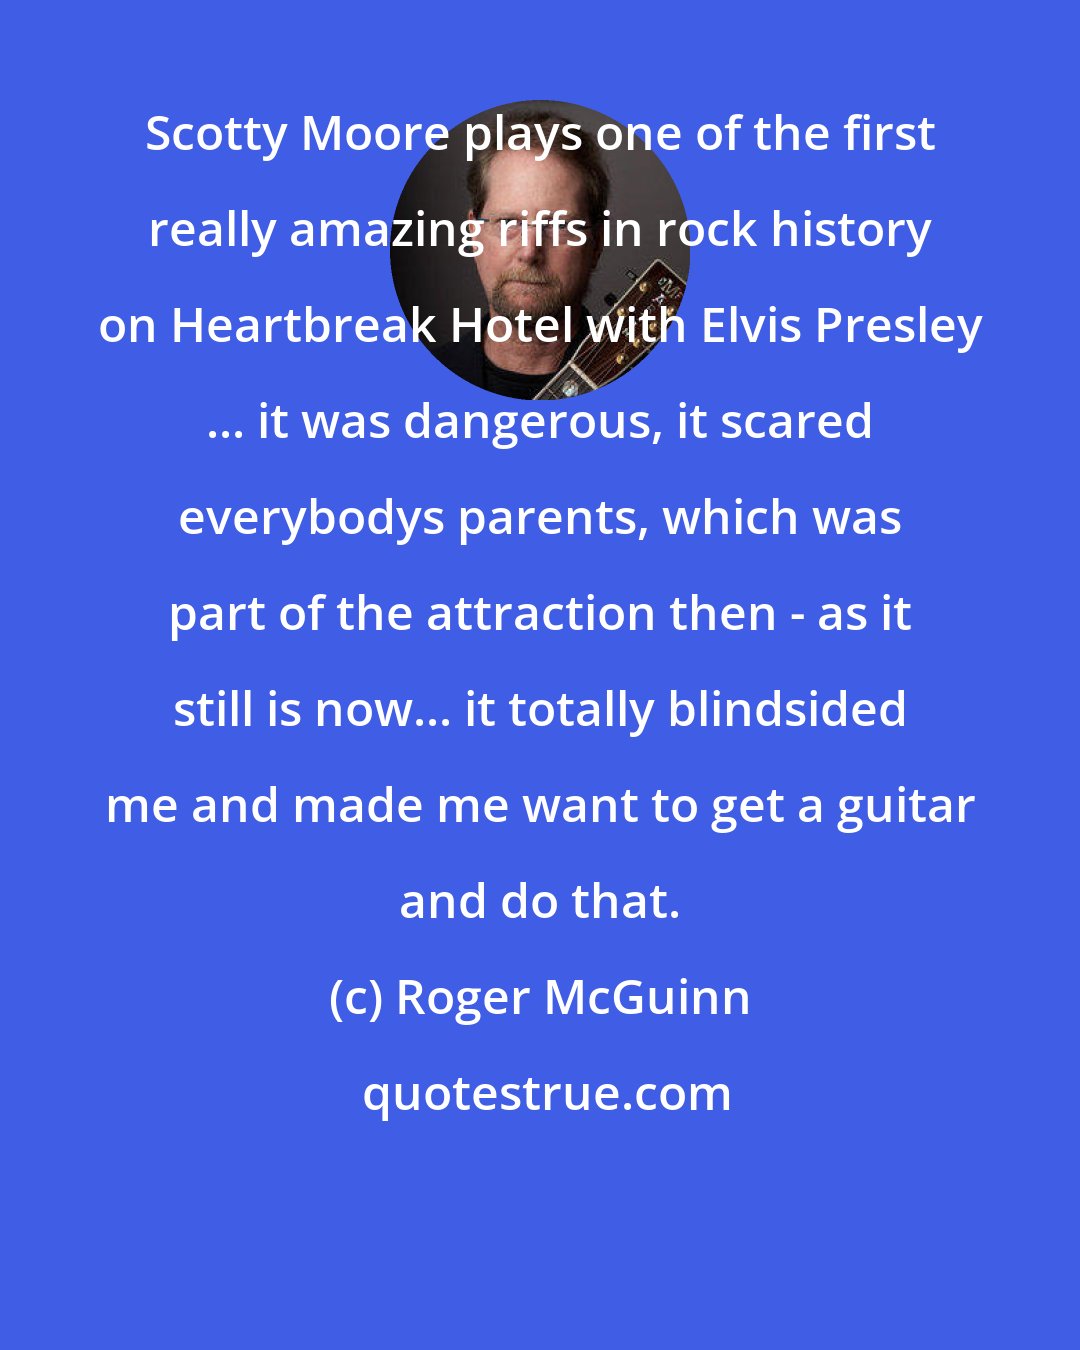 Roger McGuinn: Scotty Moore plays one of the first really amazing riffs in rock history on Heartbreak Hotel with Elvis Presley ... it was dangerous, it scared everybodys parents, which was part of the attraction then - as it still is now... it totally blindsided me and made me want to get a guitar and do that.